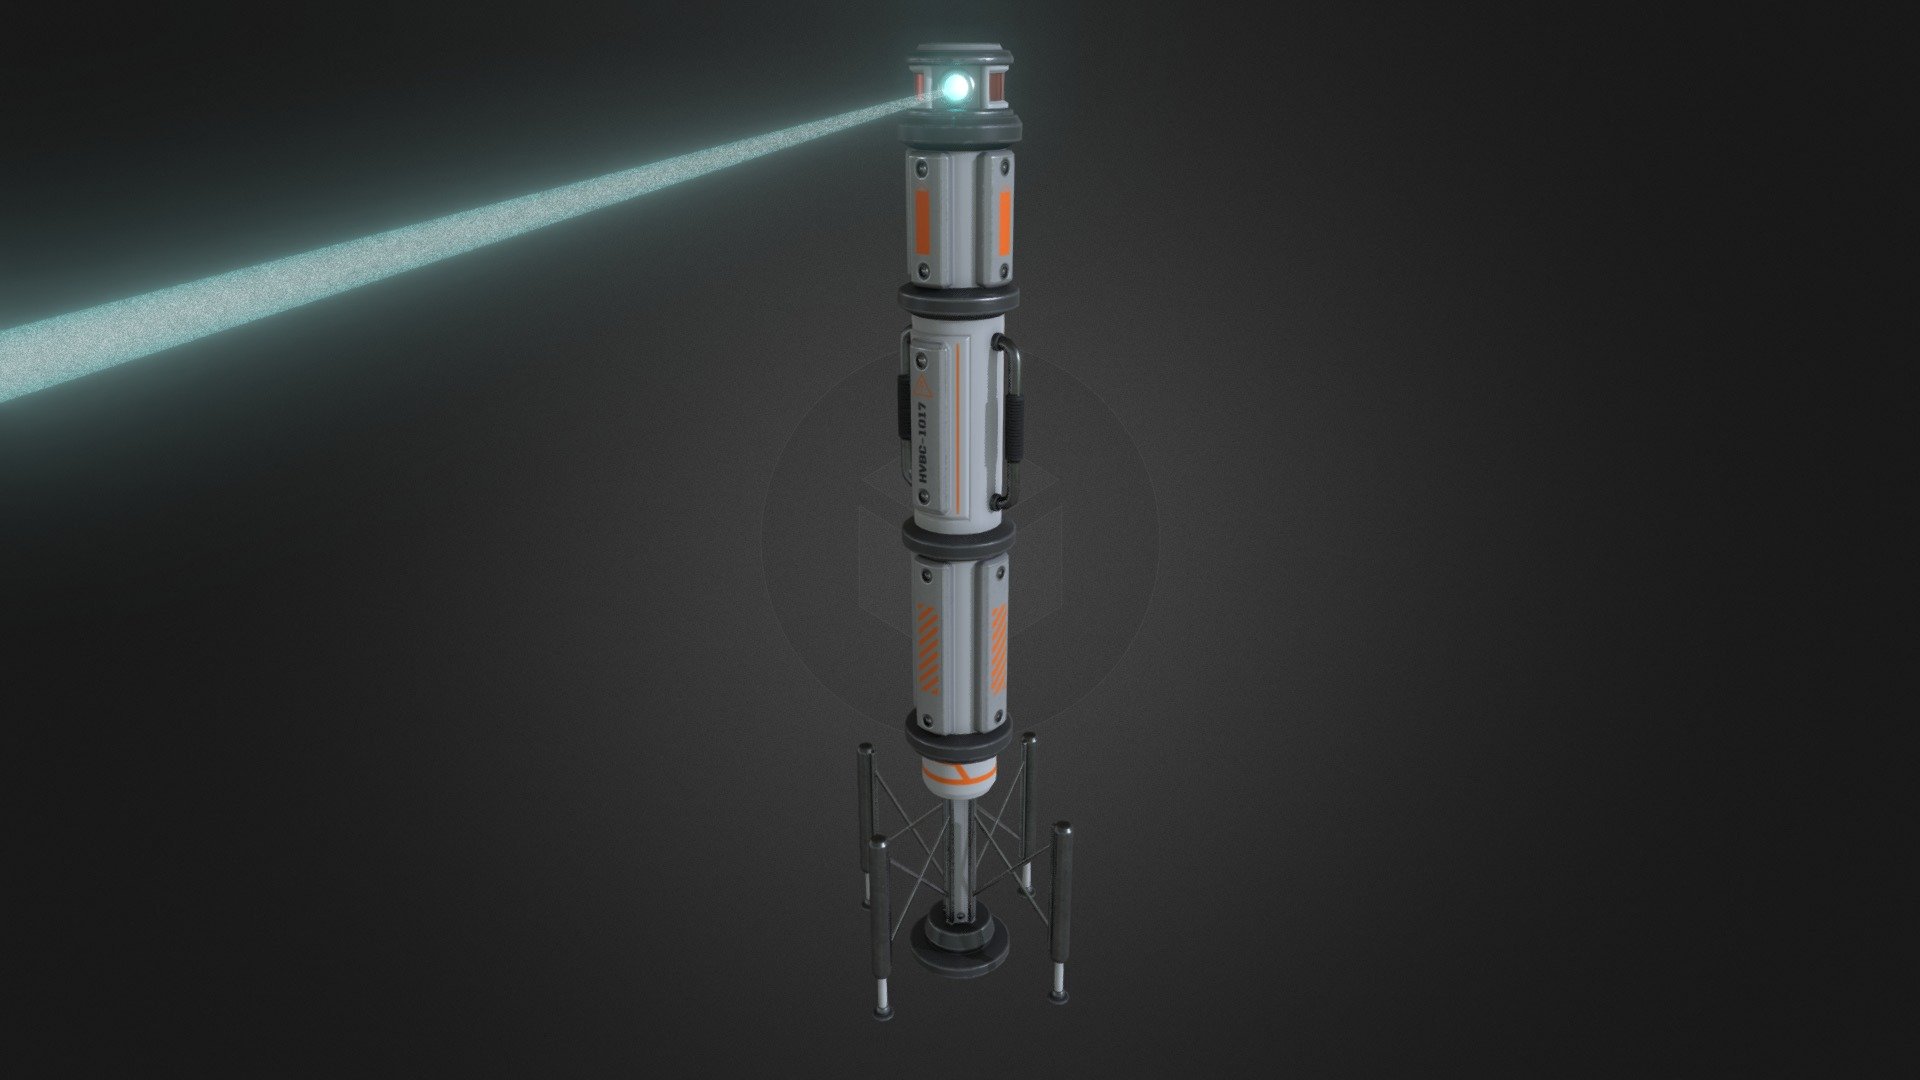 This is a laser emitter/digital pattern identifier for VR Sea Legs by 3lbgames! Made for Unity engine, modeled in Blender, textured in Substance Painter 3d model